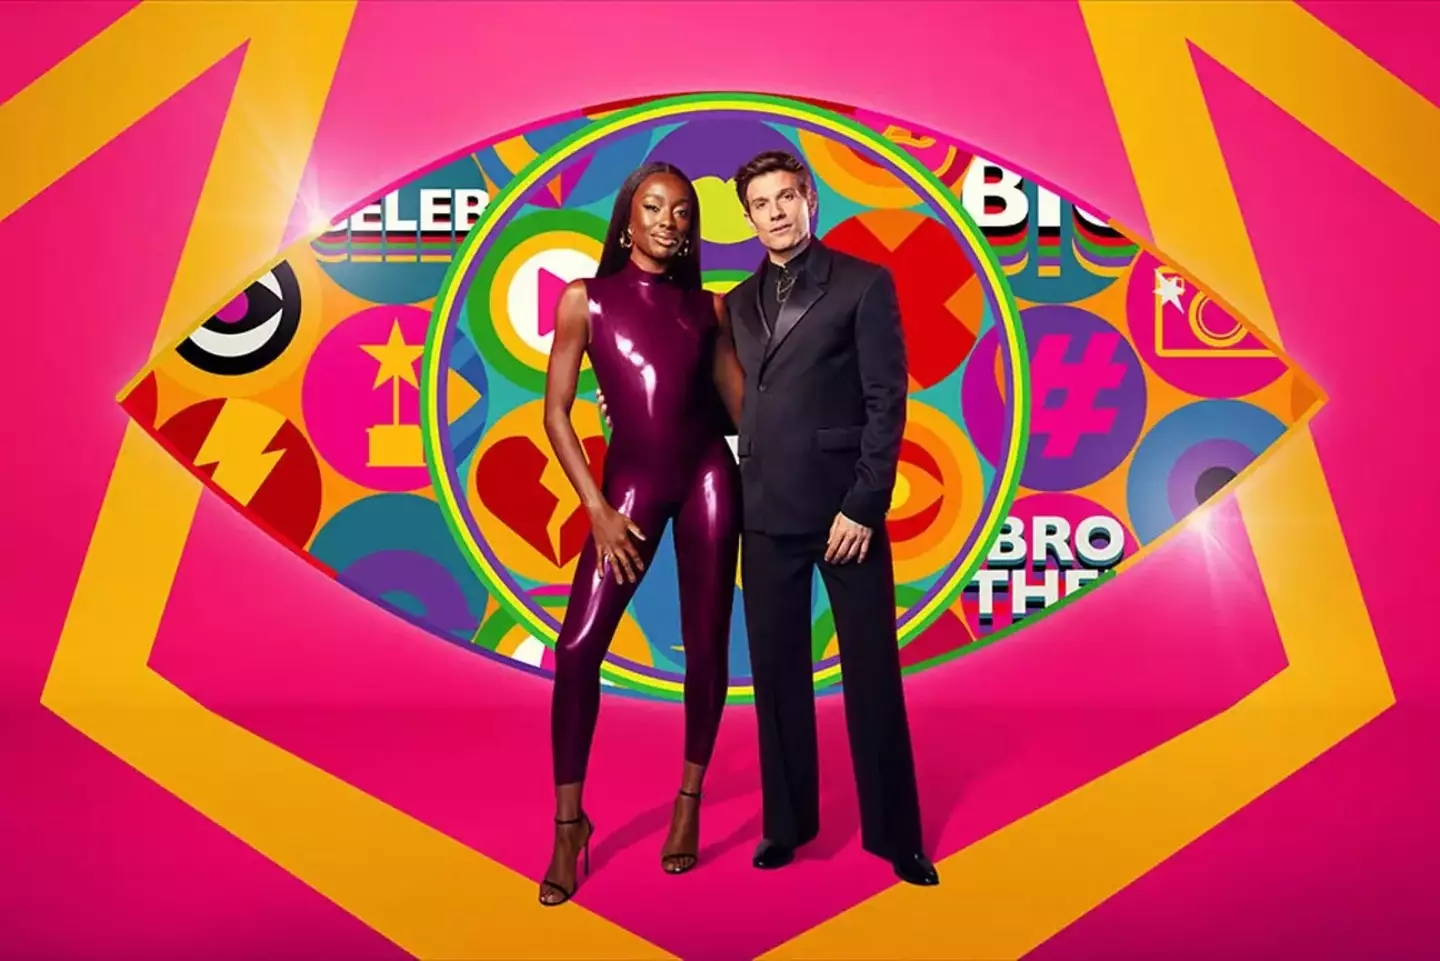 Celebrity Big Brother will be premiering on ITV1 and ITVX tonight (4 March).